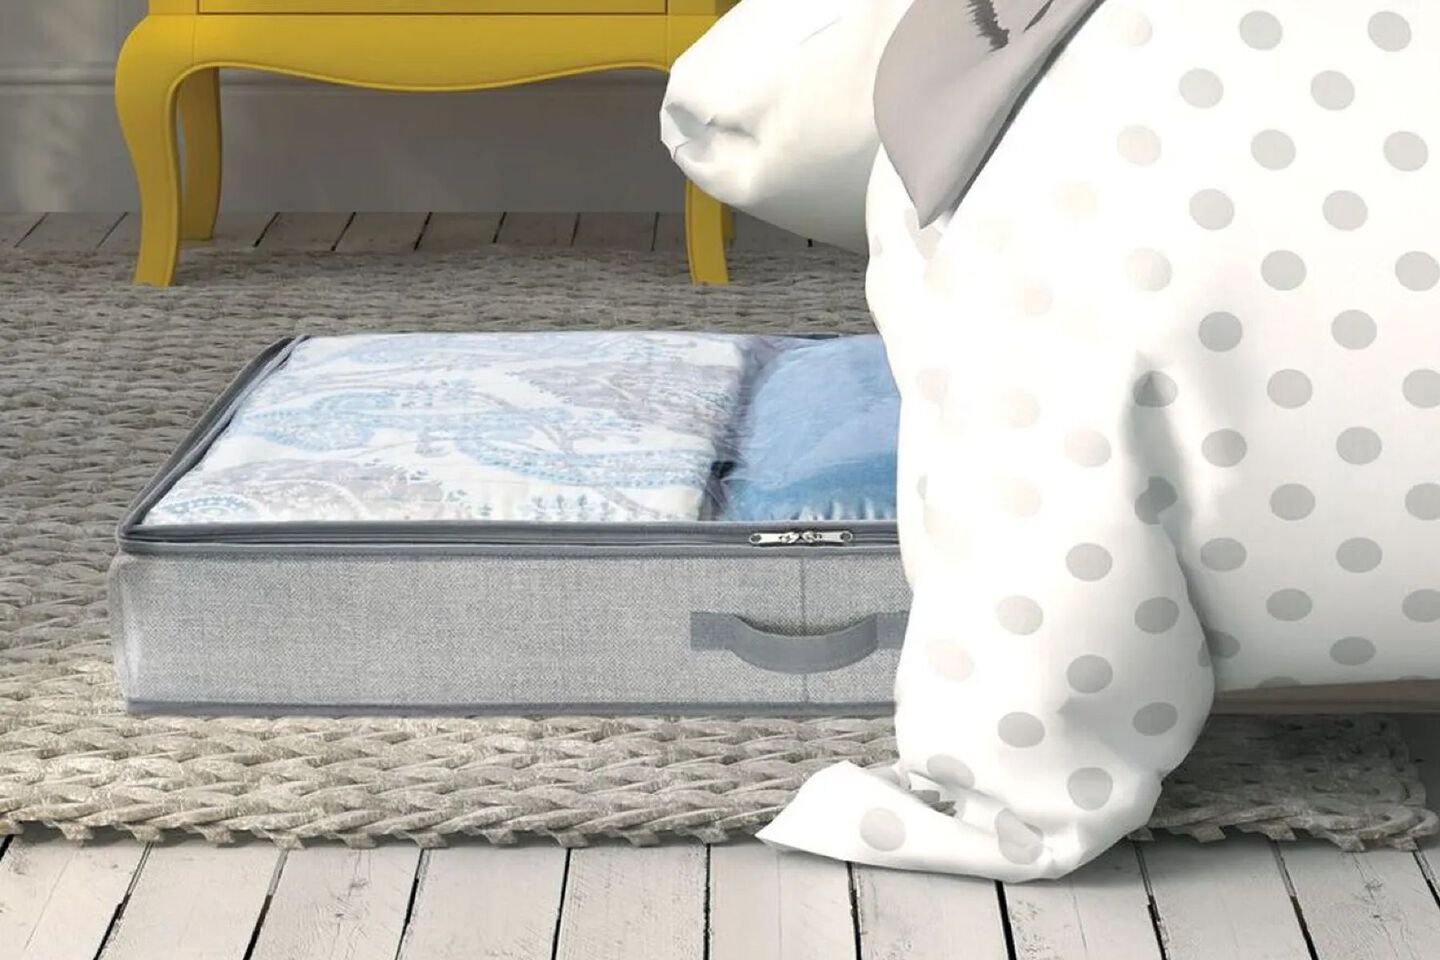 Grey and clear storage bin filled with sheets sticking out from under a bed